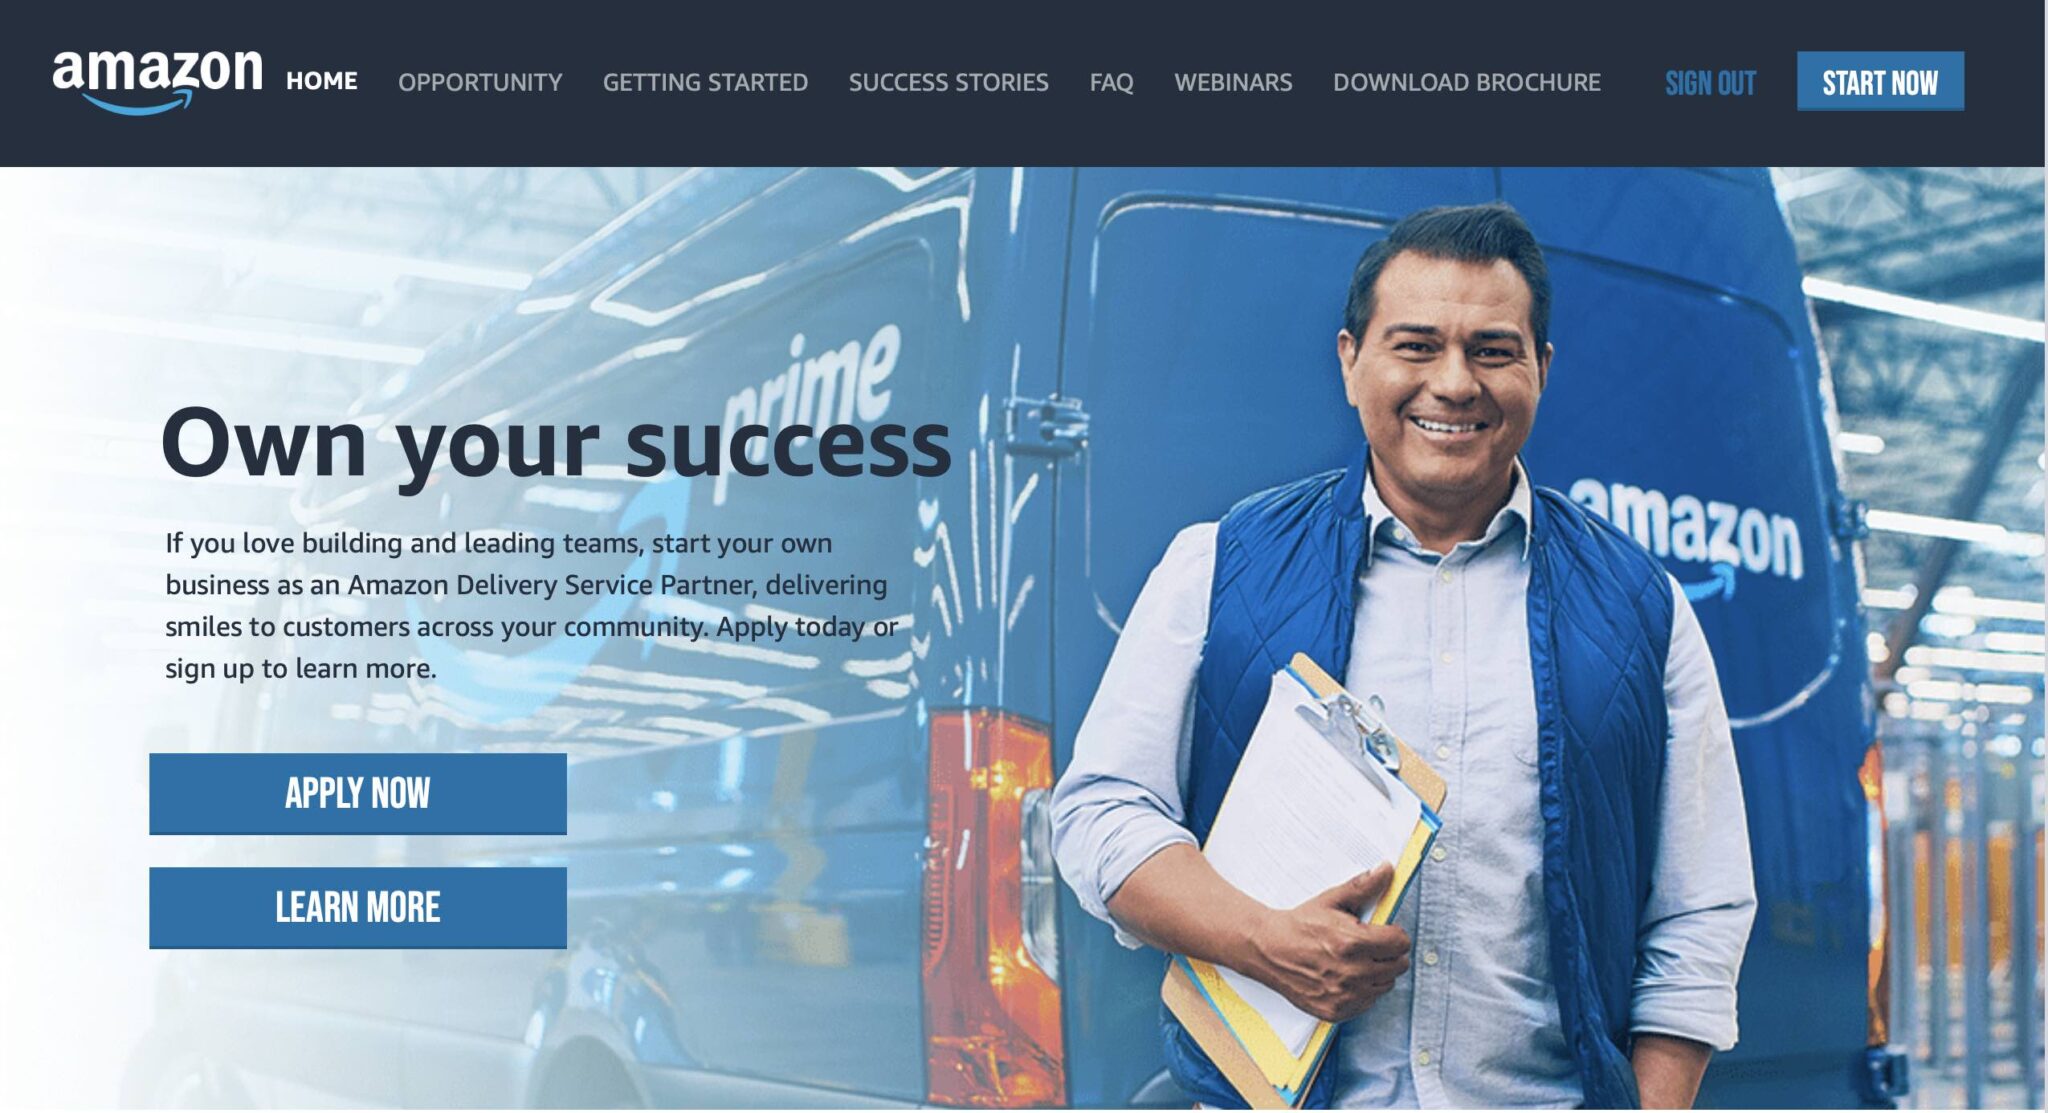 Amazon Delivery Business Opportunities Homepage